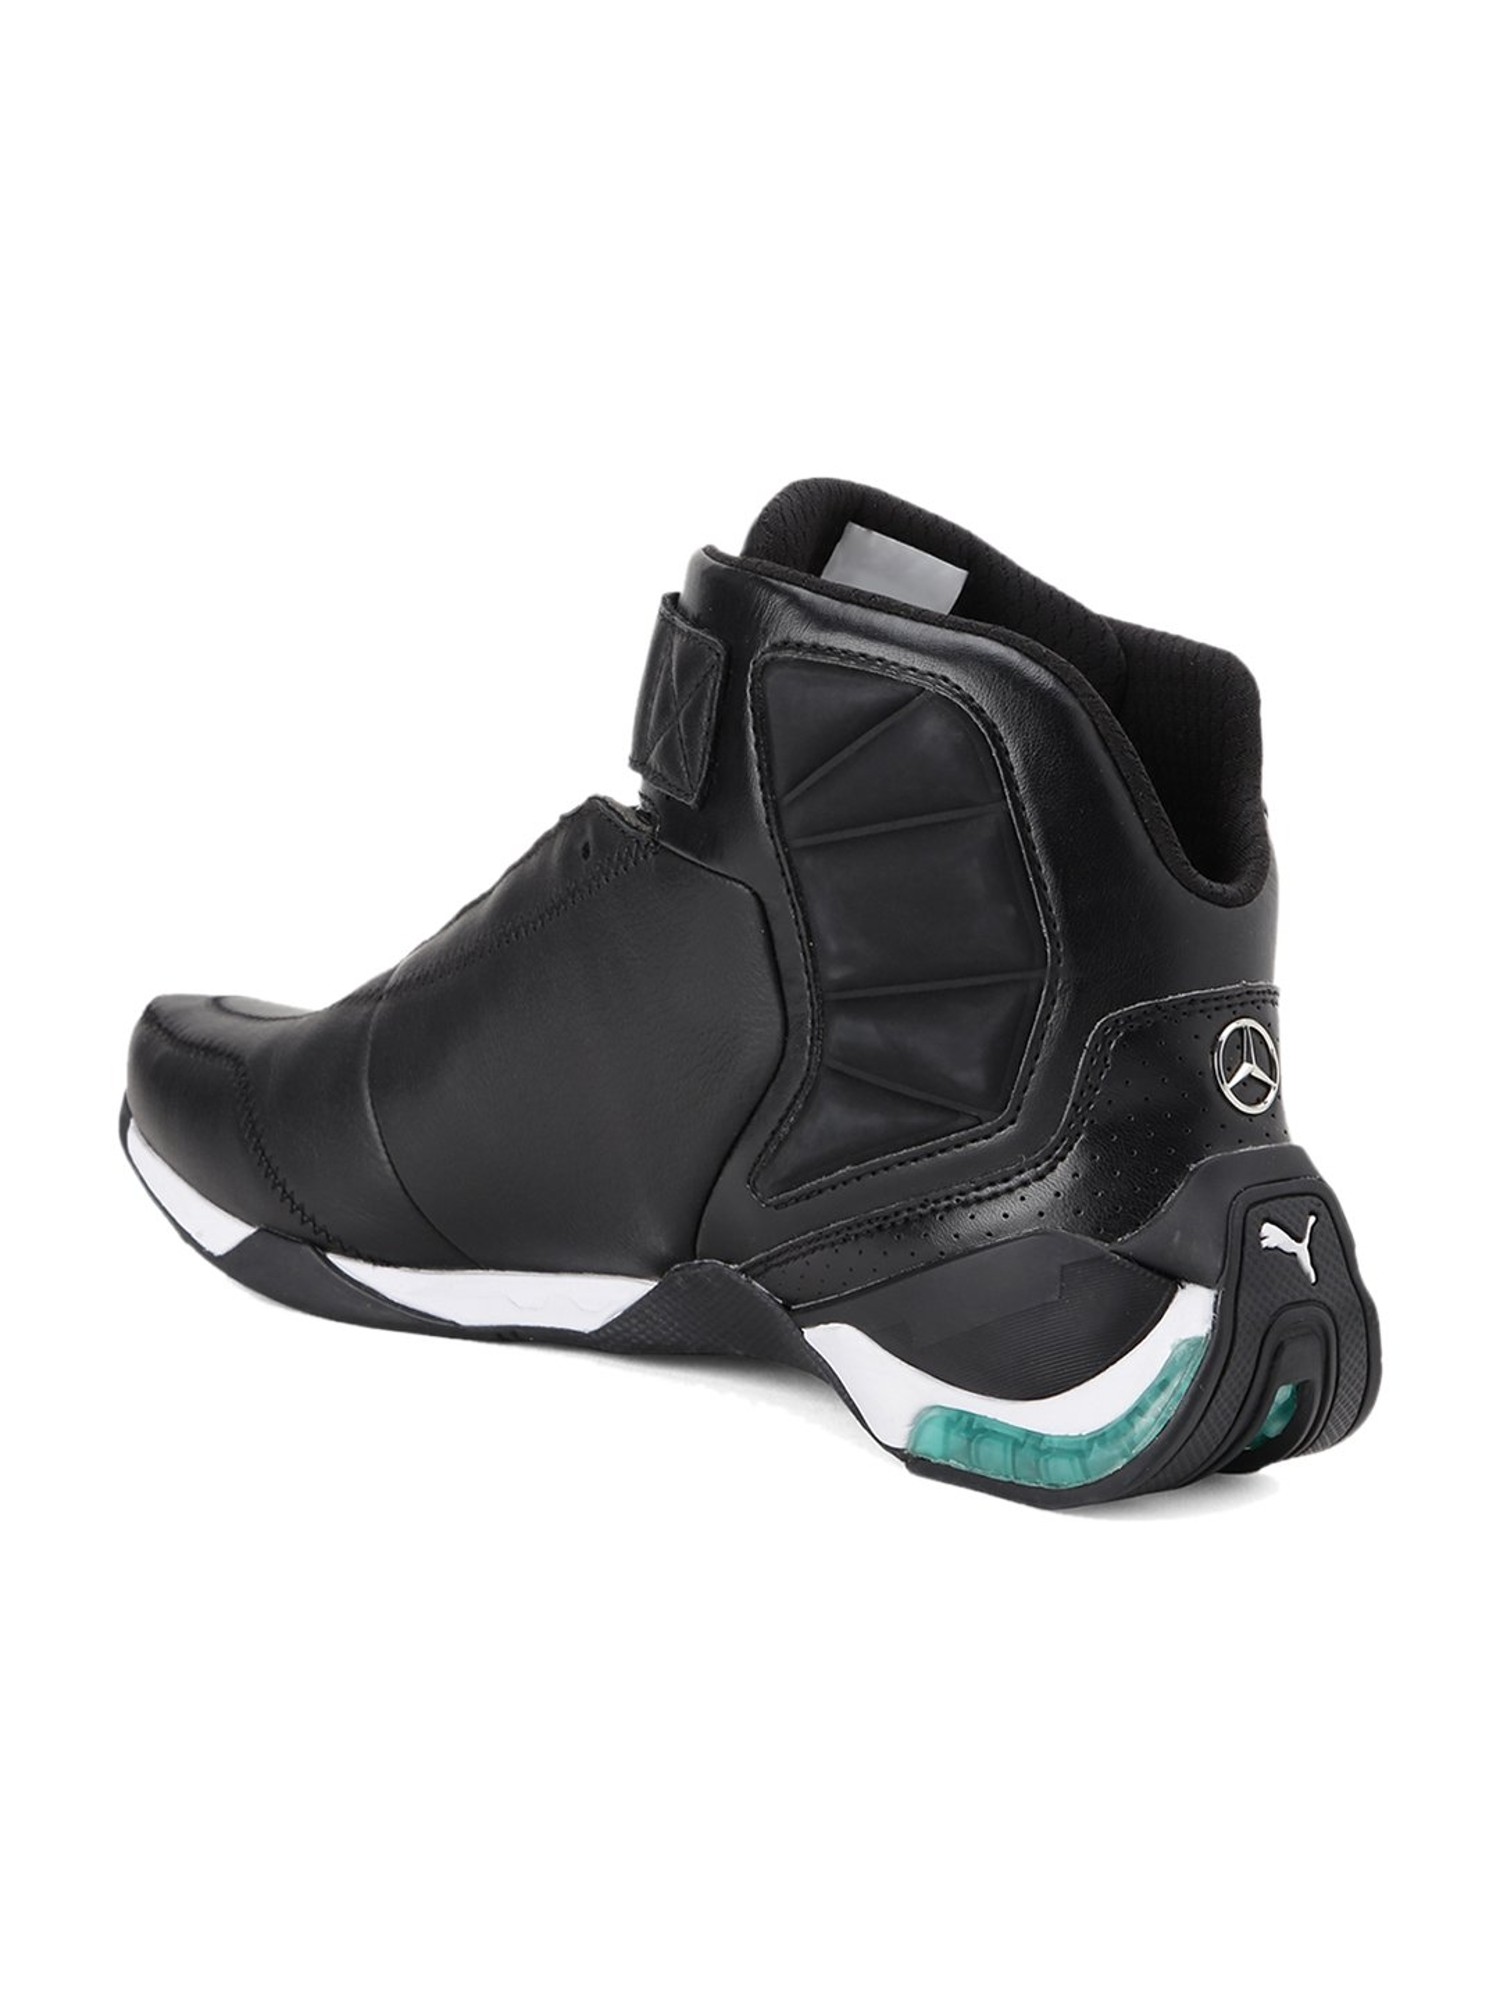 puma mercedes shoes high ankle off 53 